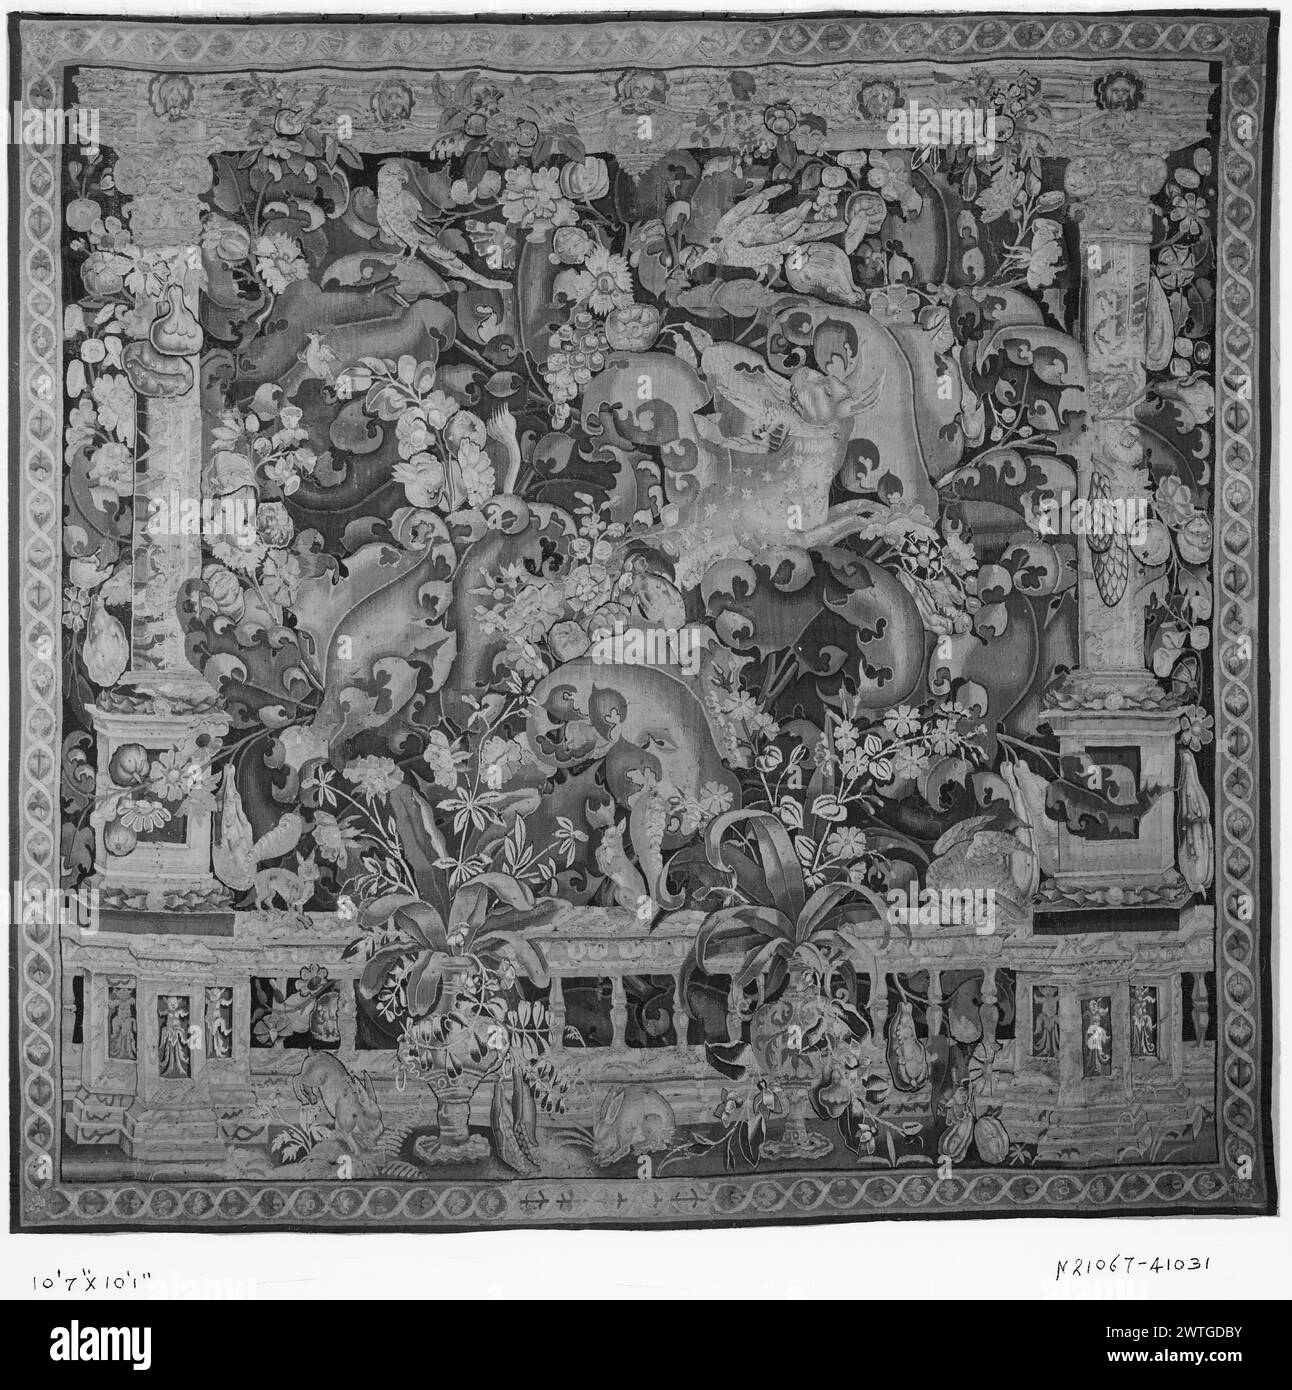 Large-leaf proscenium-verdure with urns and balustrade. unknown c. 1550-1600 Tapestry Dimensions: H 10'1' x W 10'7' Tapestry Materials/Techniques: unknown Culture: Flemish Weaving Center: unknown Ownership History: French & Co. purchased from Arden Galleries 10/9/1929. Proscenium formed by balustrade supporting 2 columns & entablature with masks; 2 urns holding foliage, 2 rabbits & fruit in front of foreground balustrade; wispy flowering plants & fruit amidst large scrolling acanthus-like leaves inhabited by galloping animal, small rodents, parrot & other birds (BRD) narrow band with guilloche Stock Photo